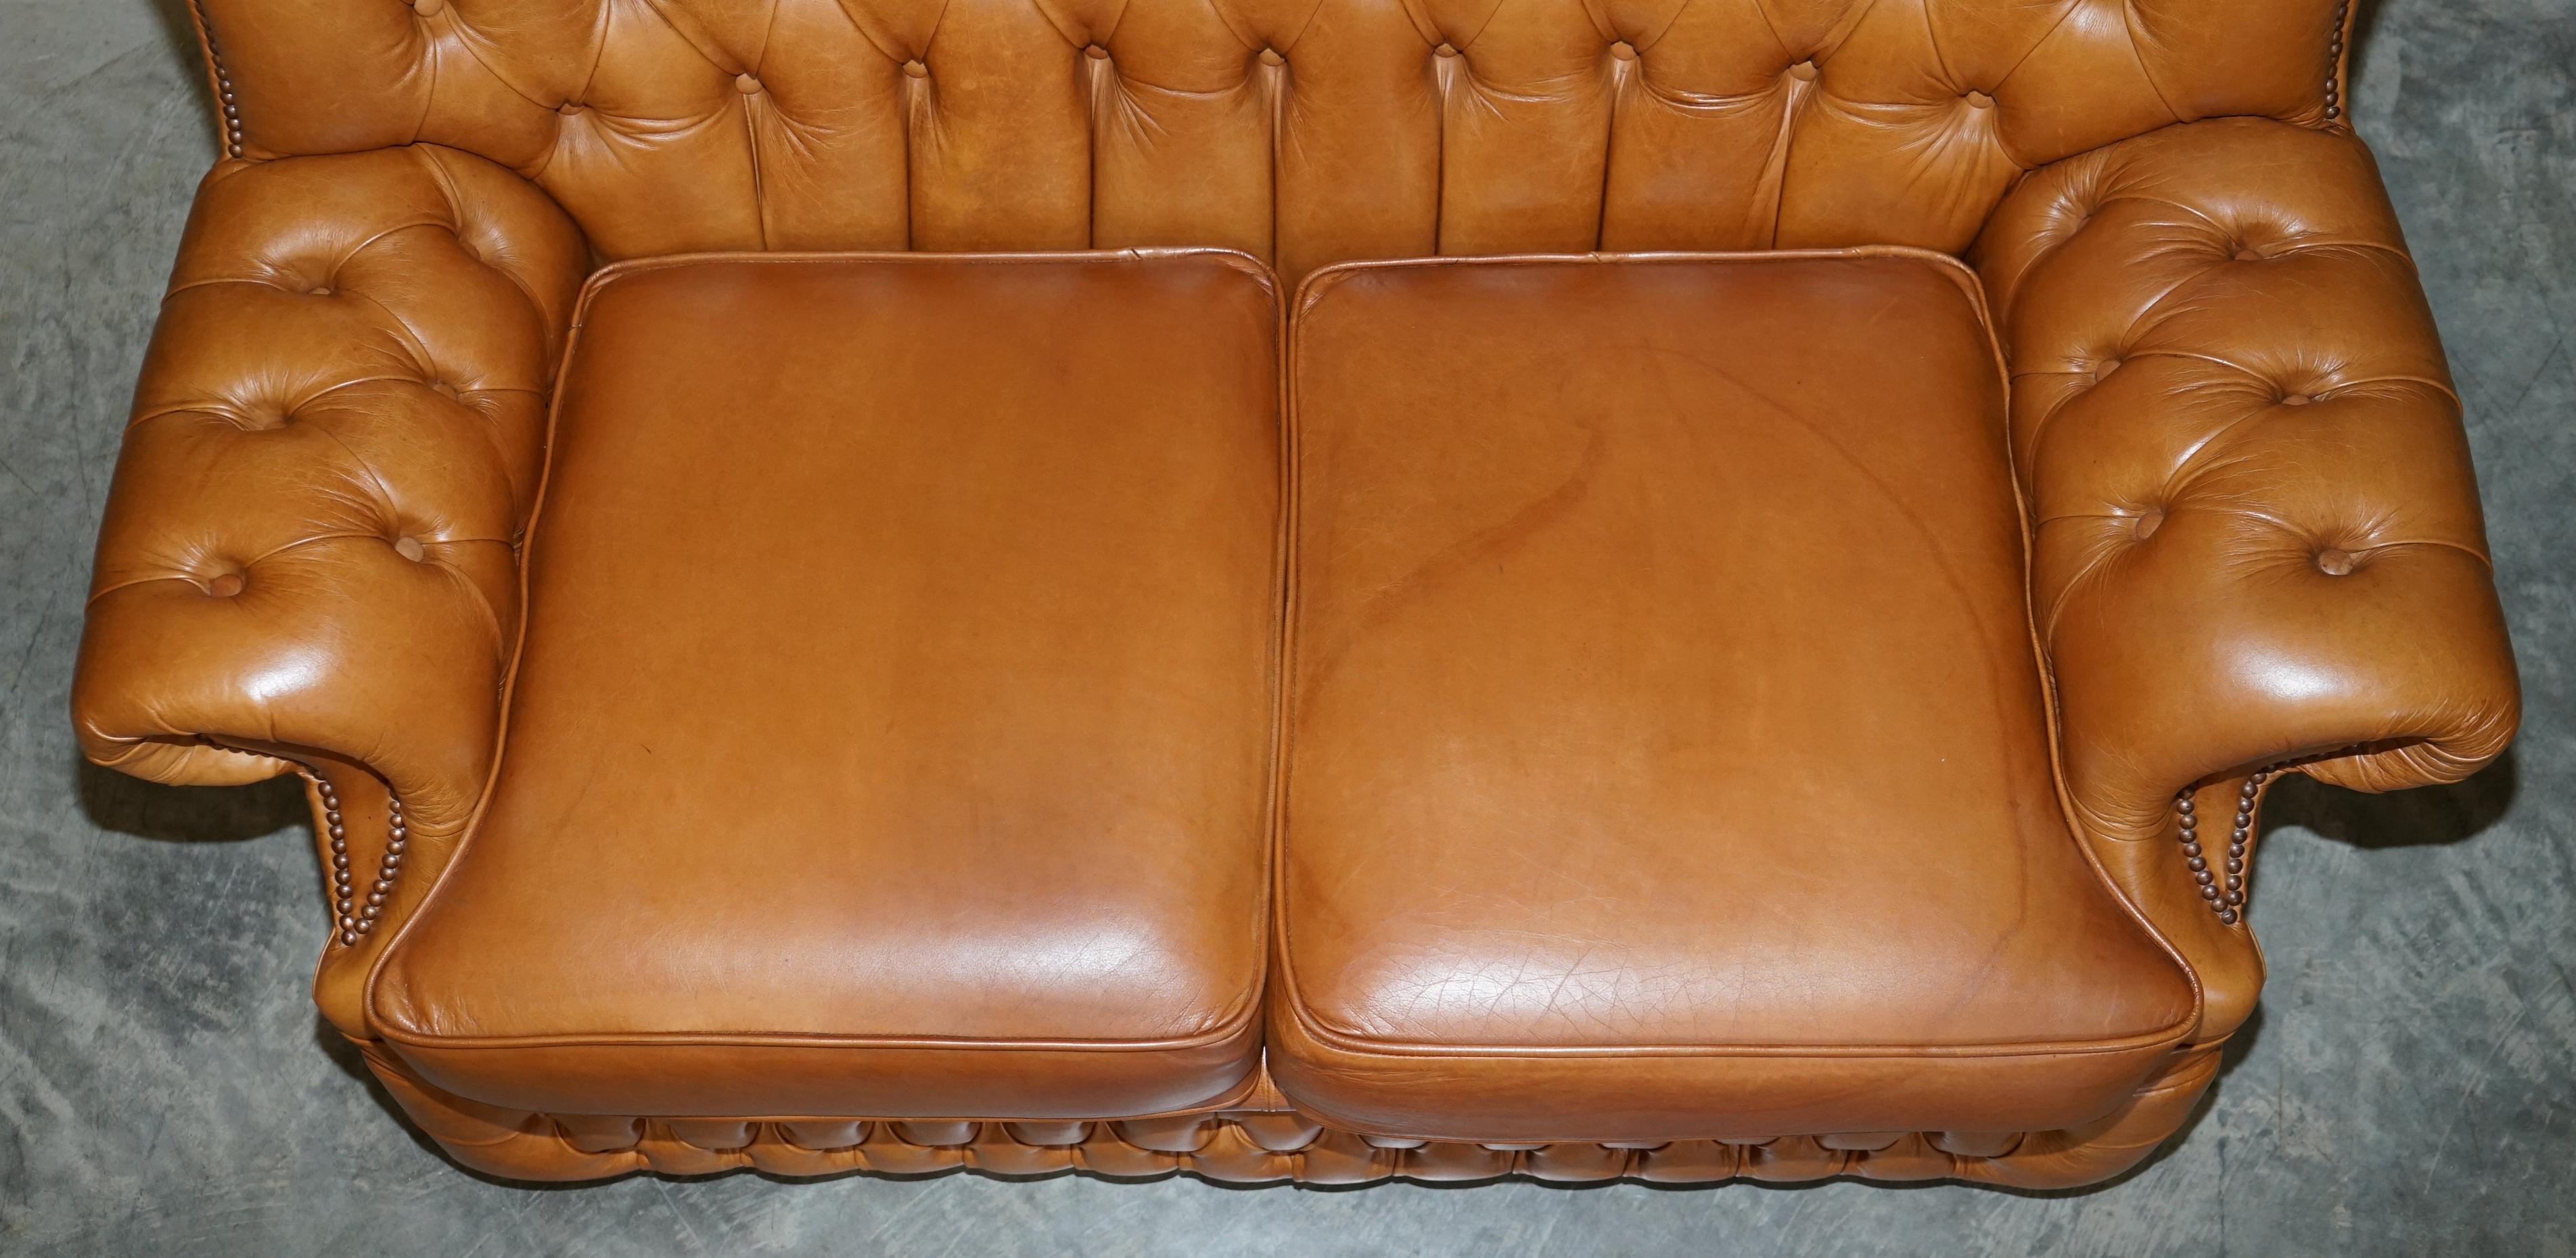 Hand-Crafted Nice Small Wide Chesterfield Tan Brown Leather Tufted Sofa with High Back For Sale